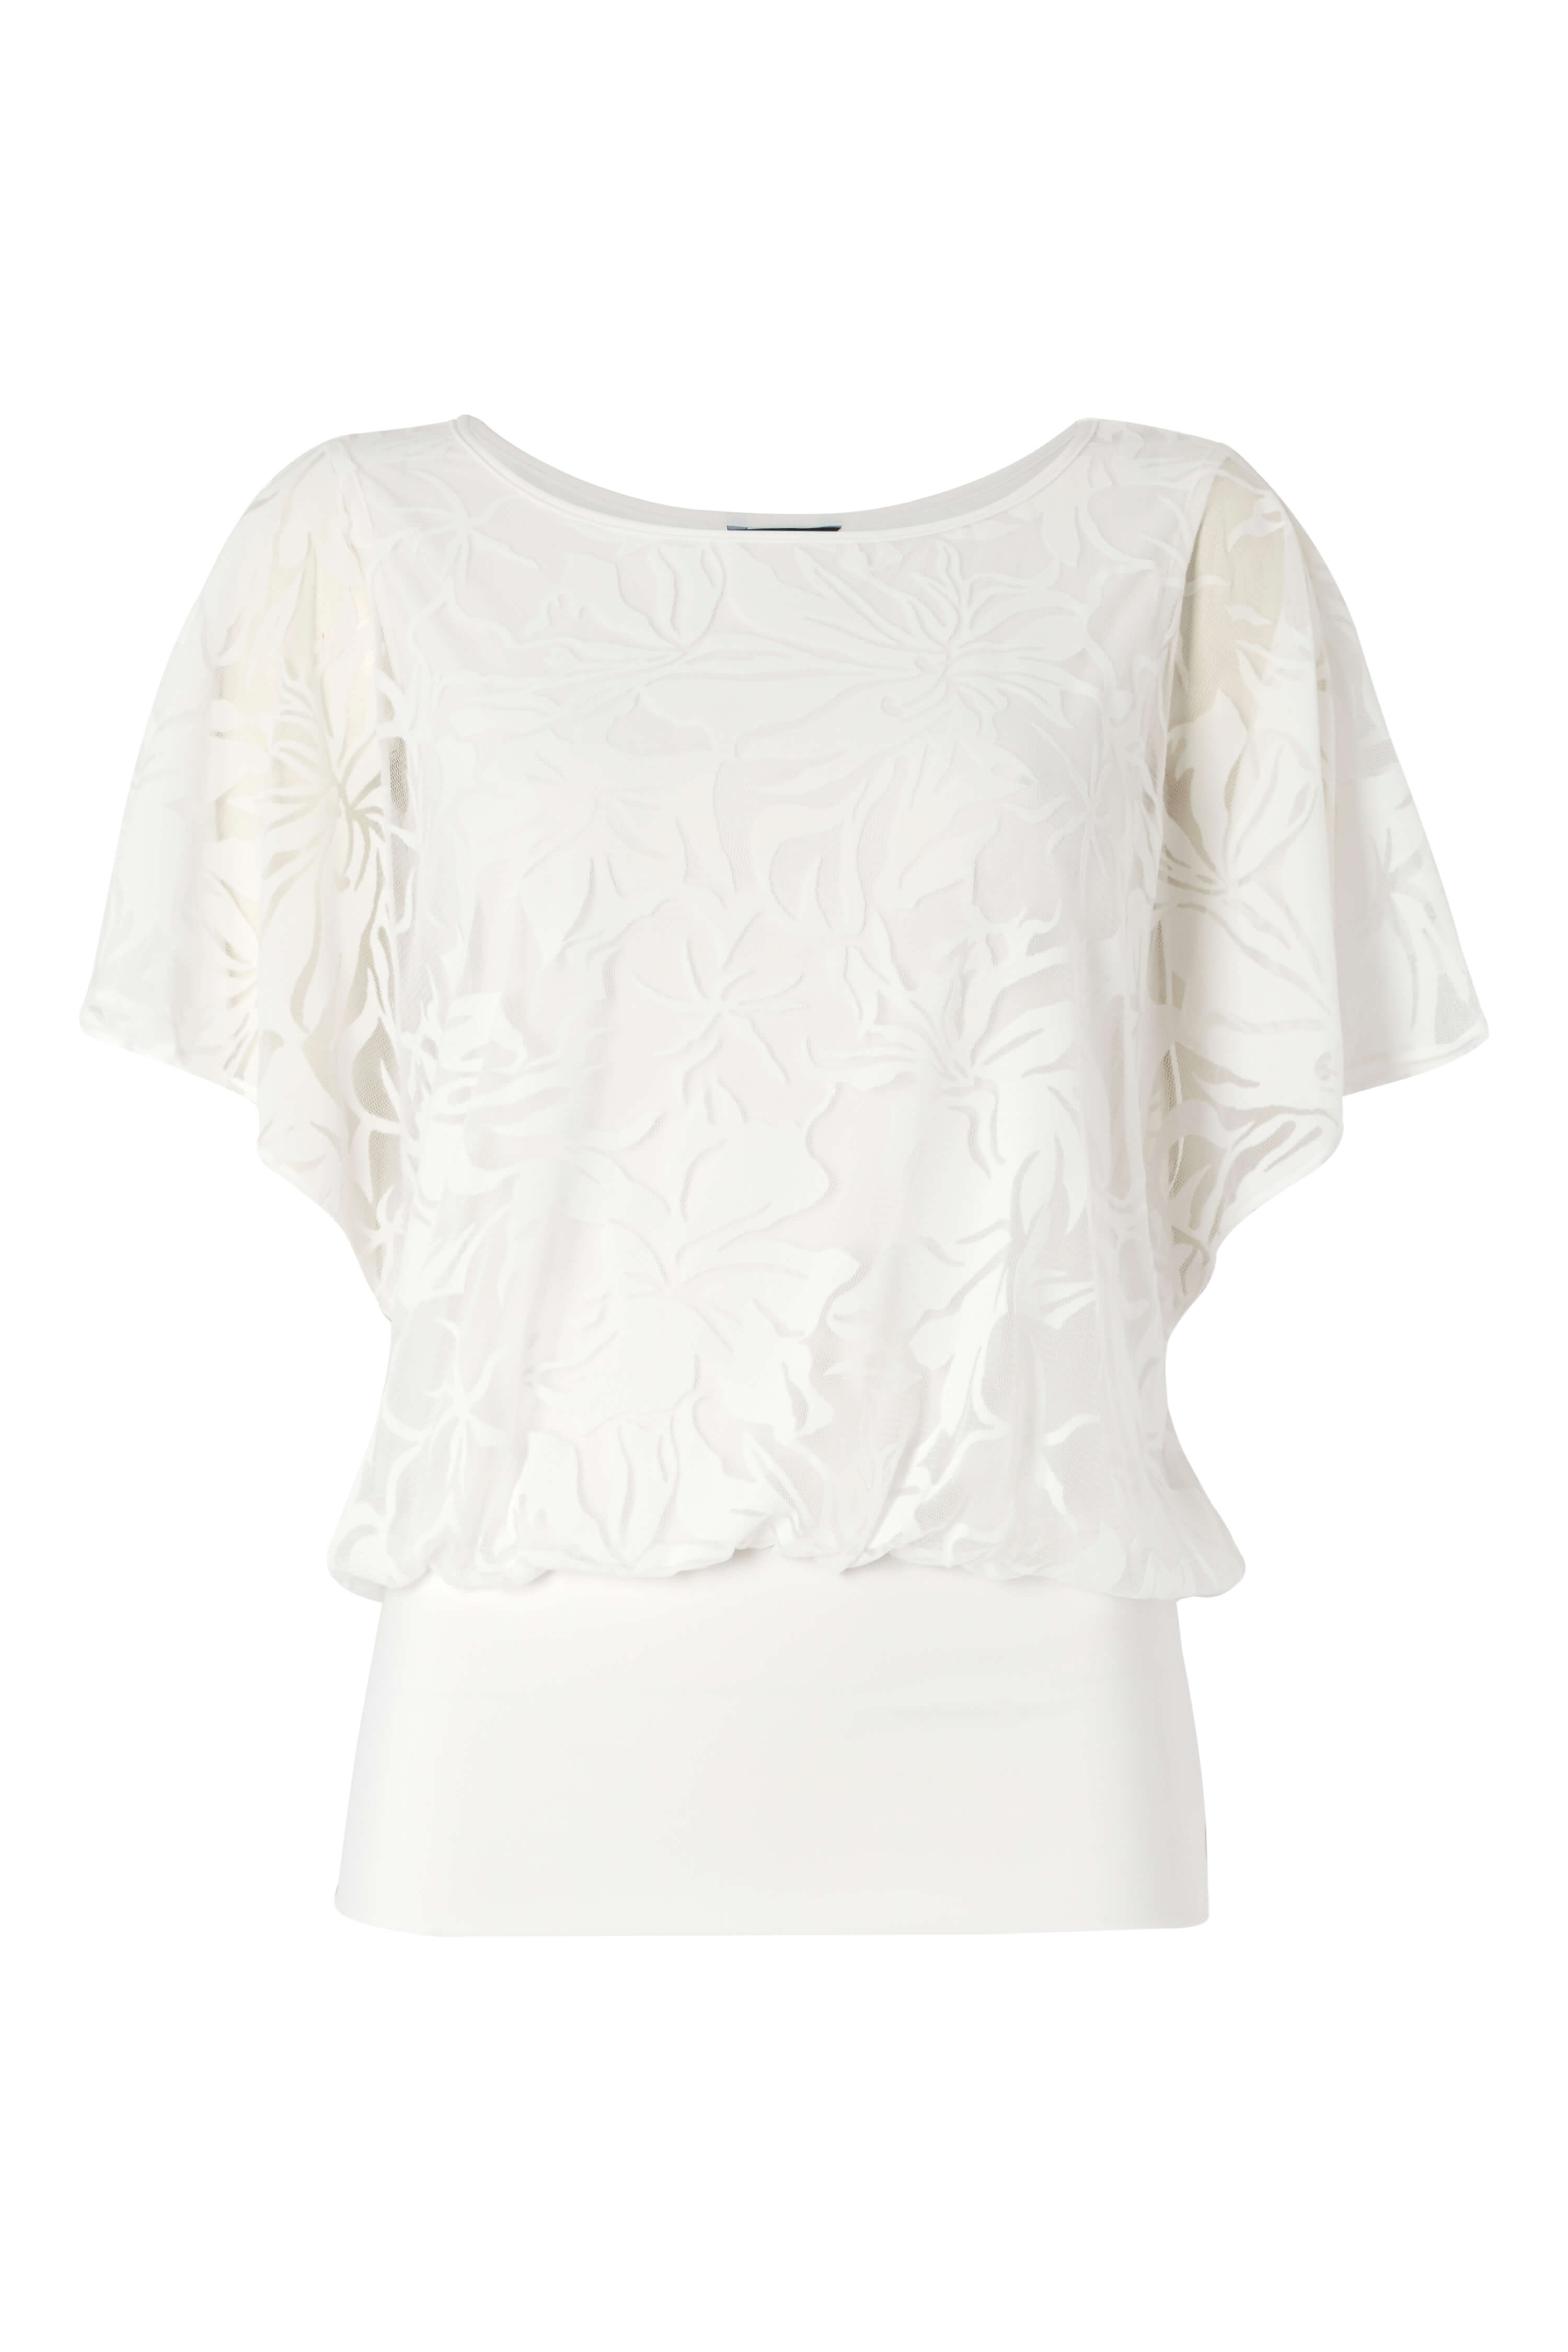 Ivory  Floral Double Layer Burnout Print Top, Image 4 of 4